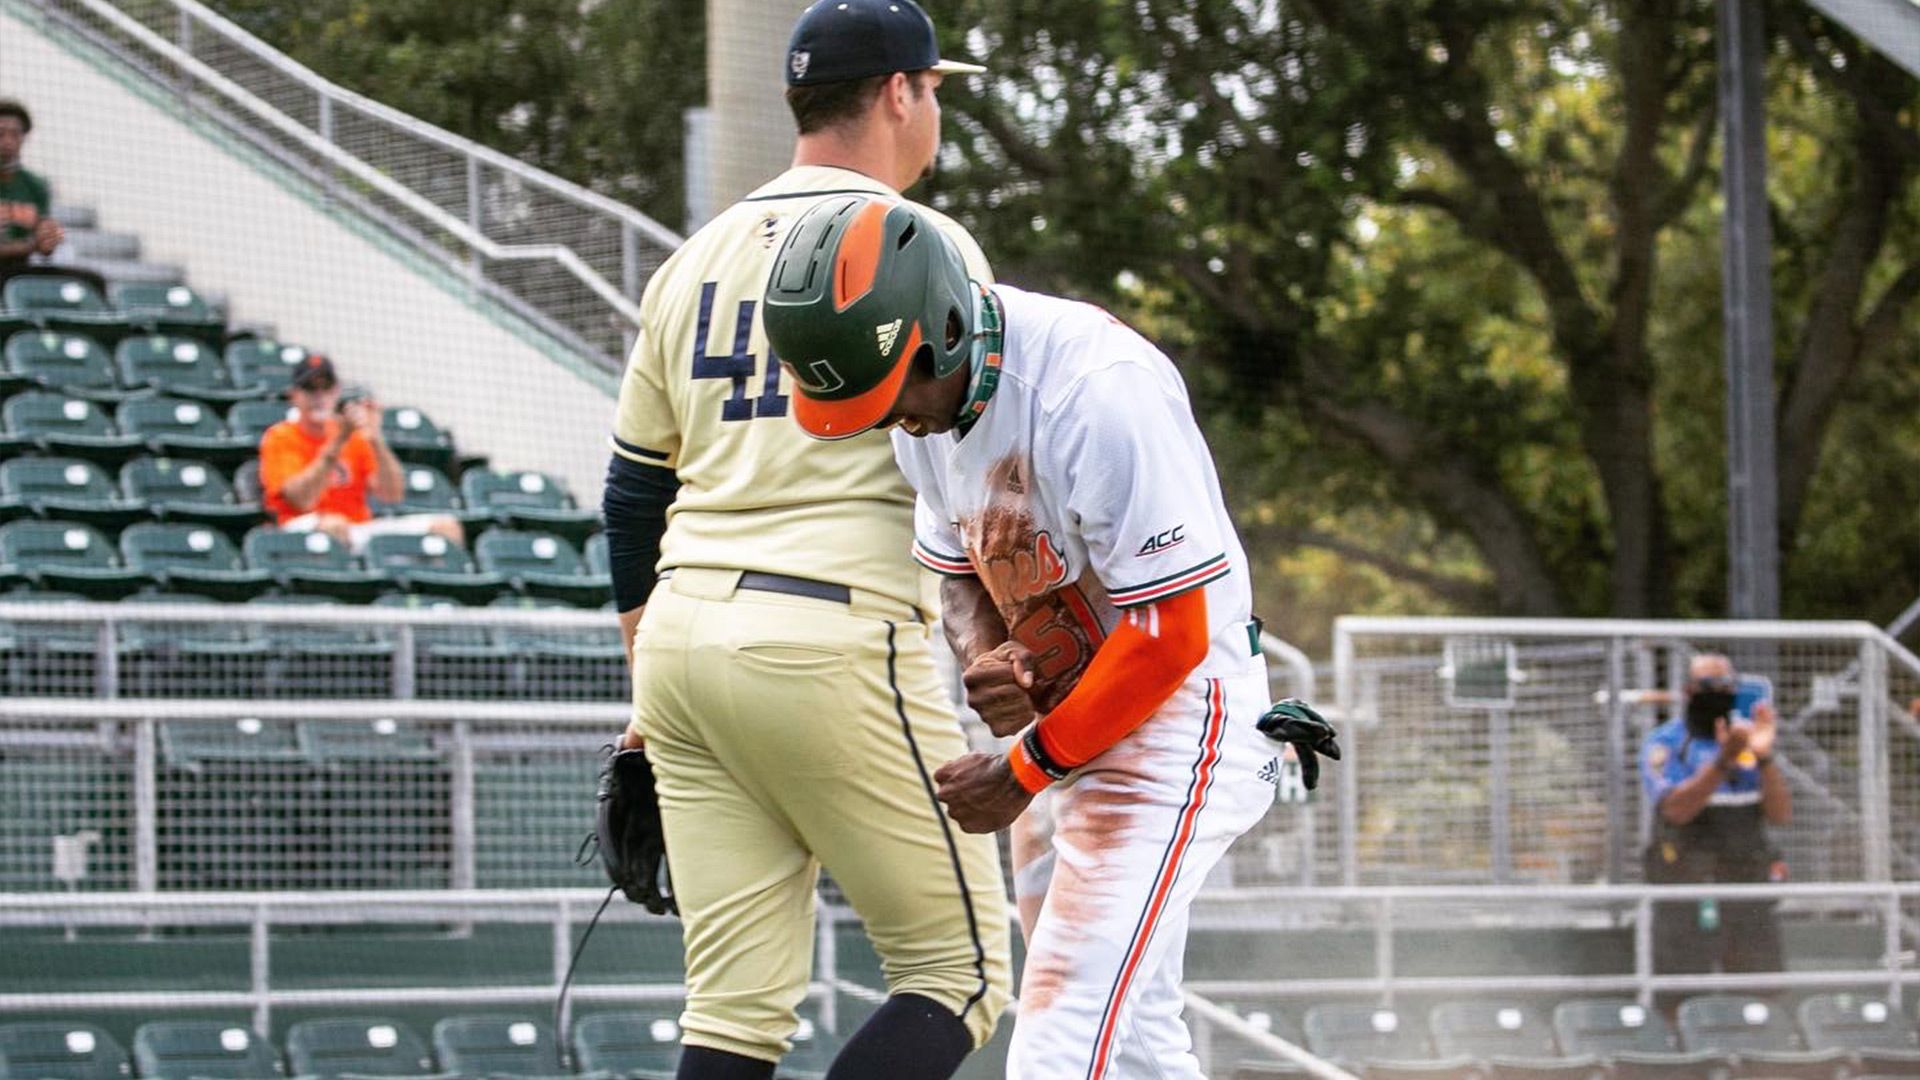 Canes Rally Late to Take Series from GT